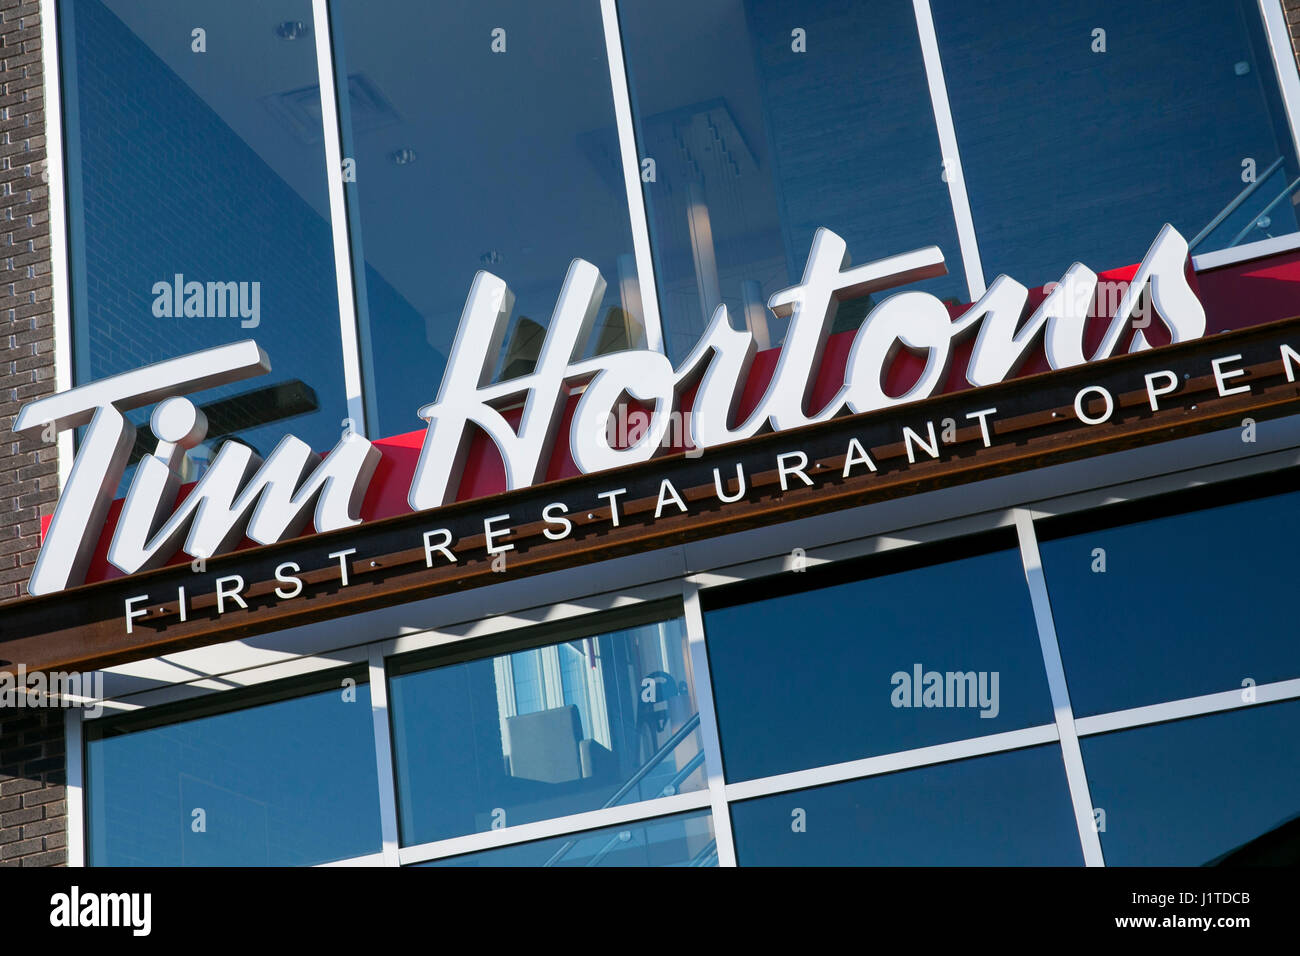 Tim Hortons Logo in Front of One of Their Restaurants in Quebec